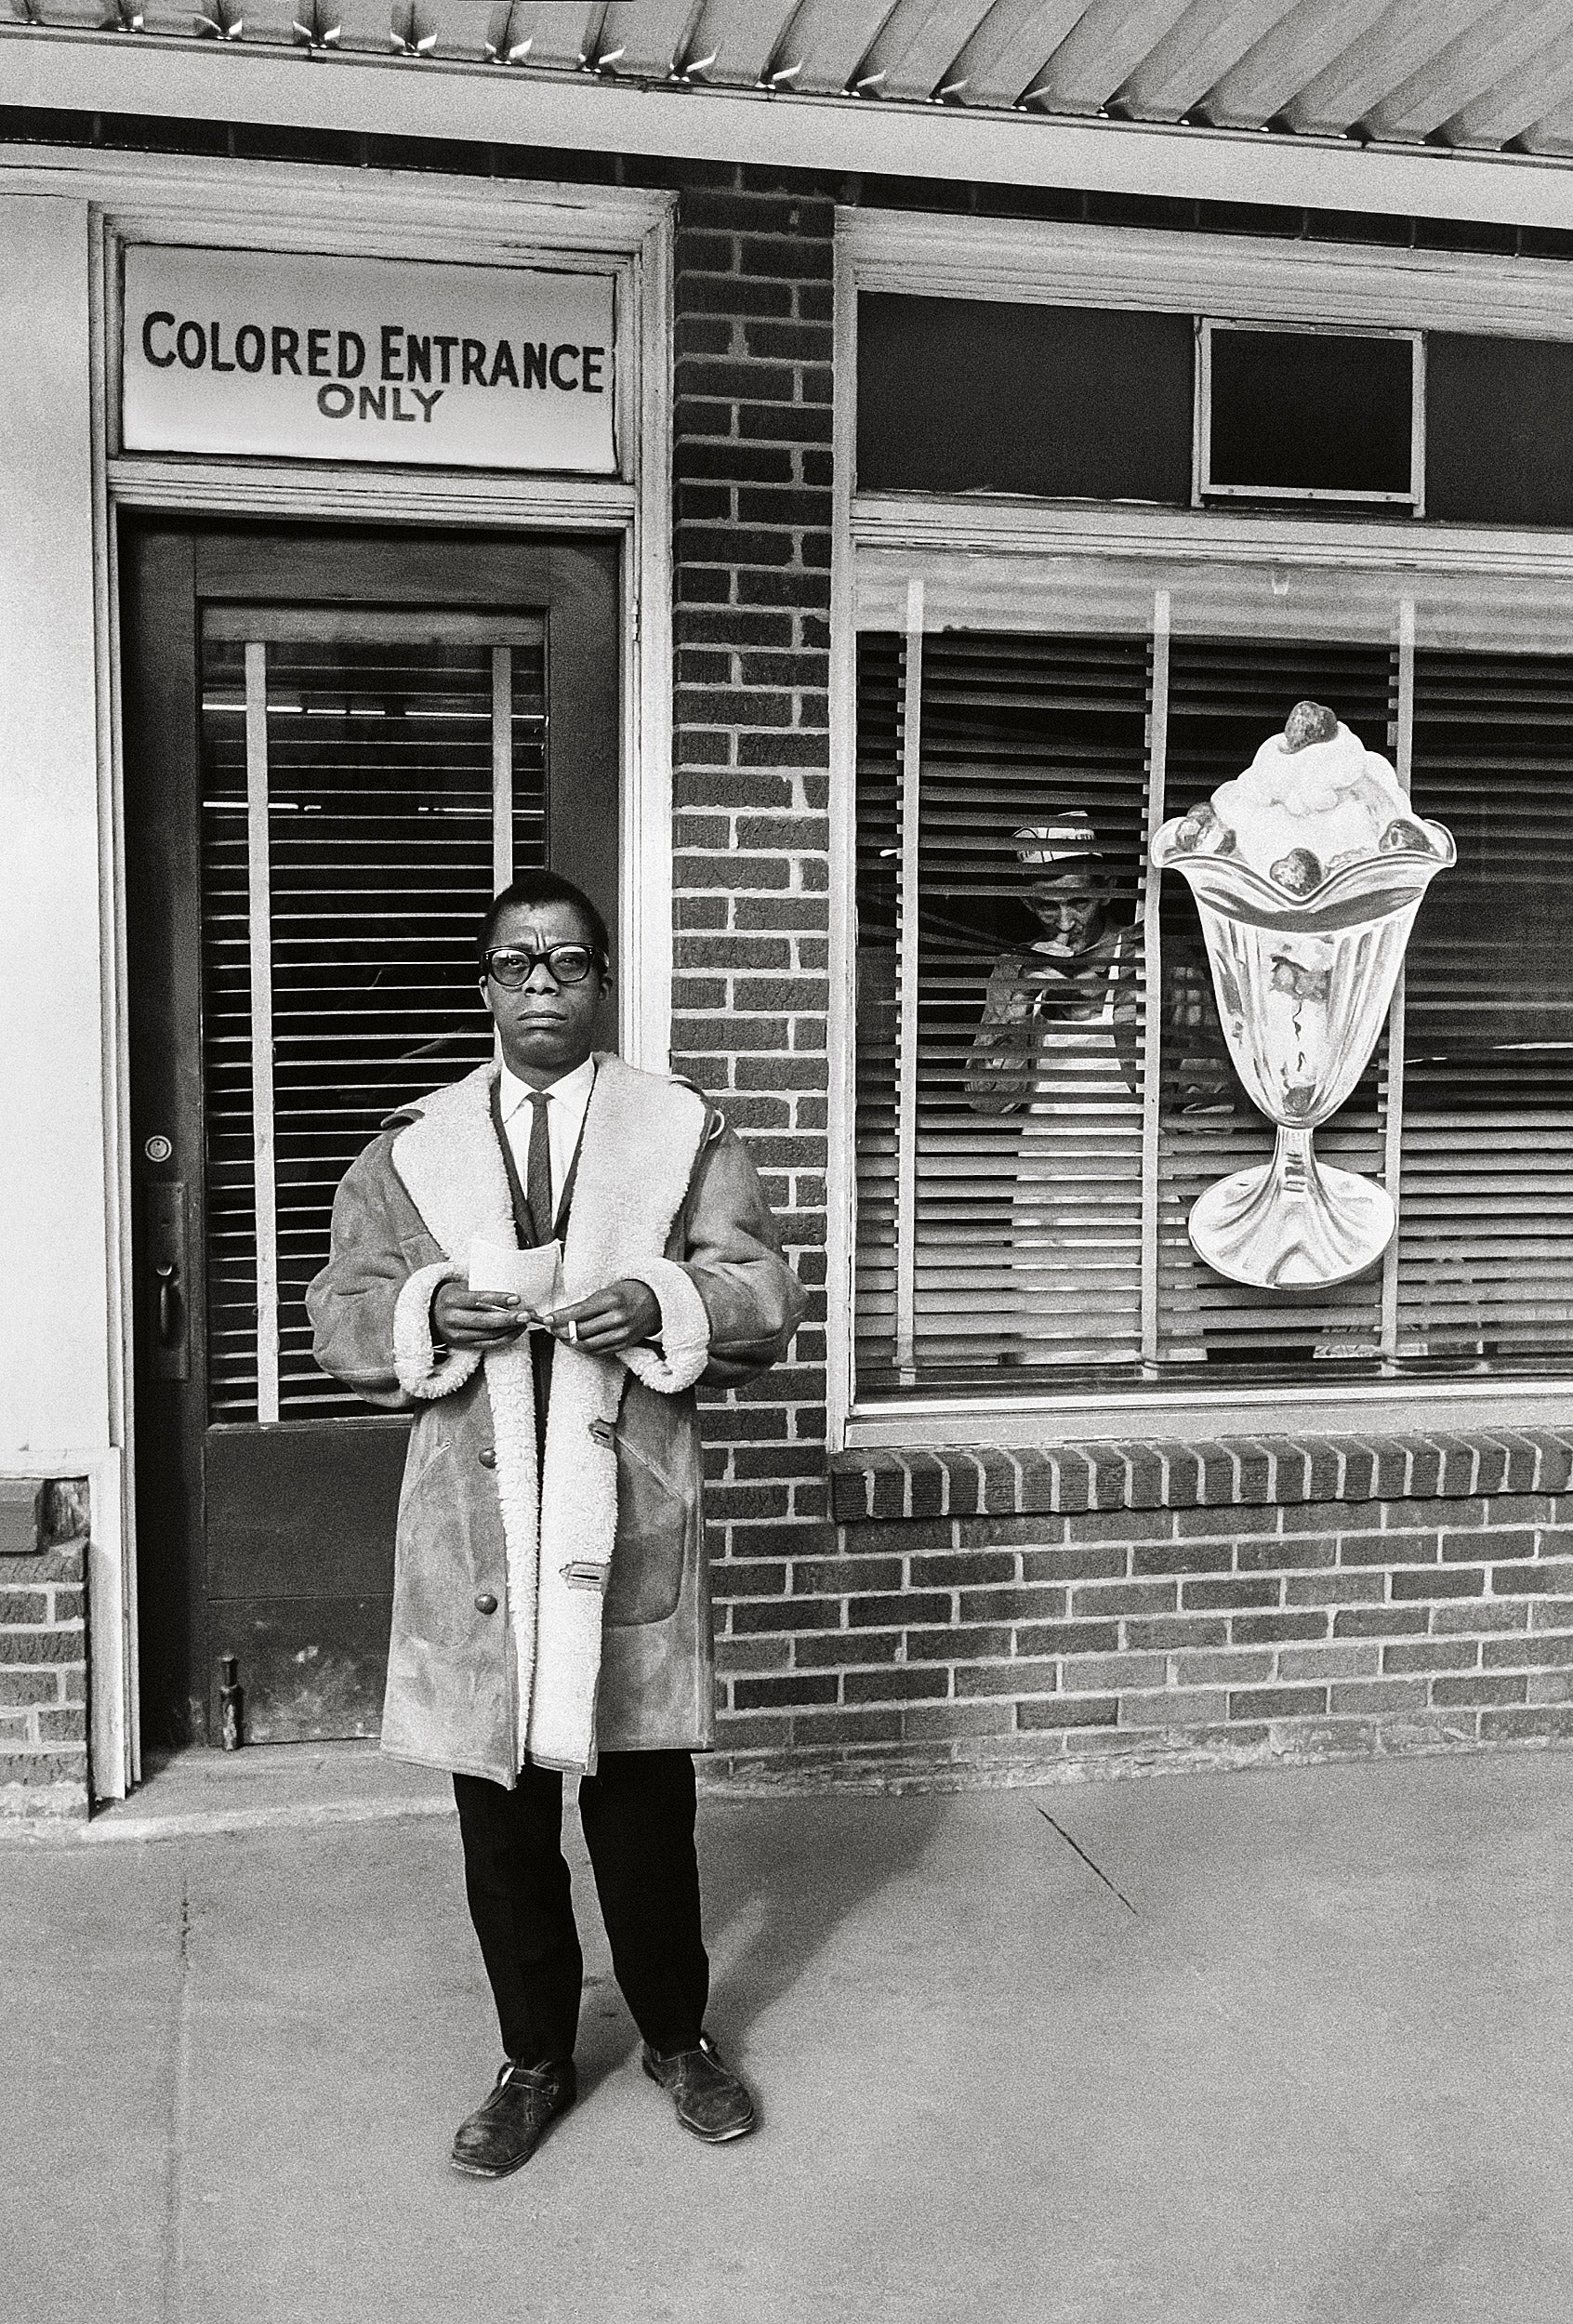 James Baldwin stands in front of "Colored entrance only" sign in New Orleans, 1963.